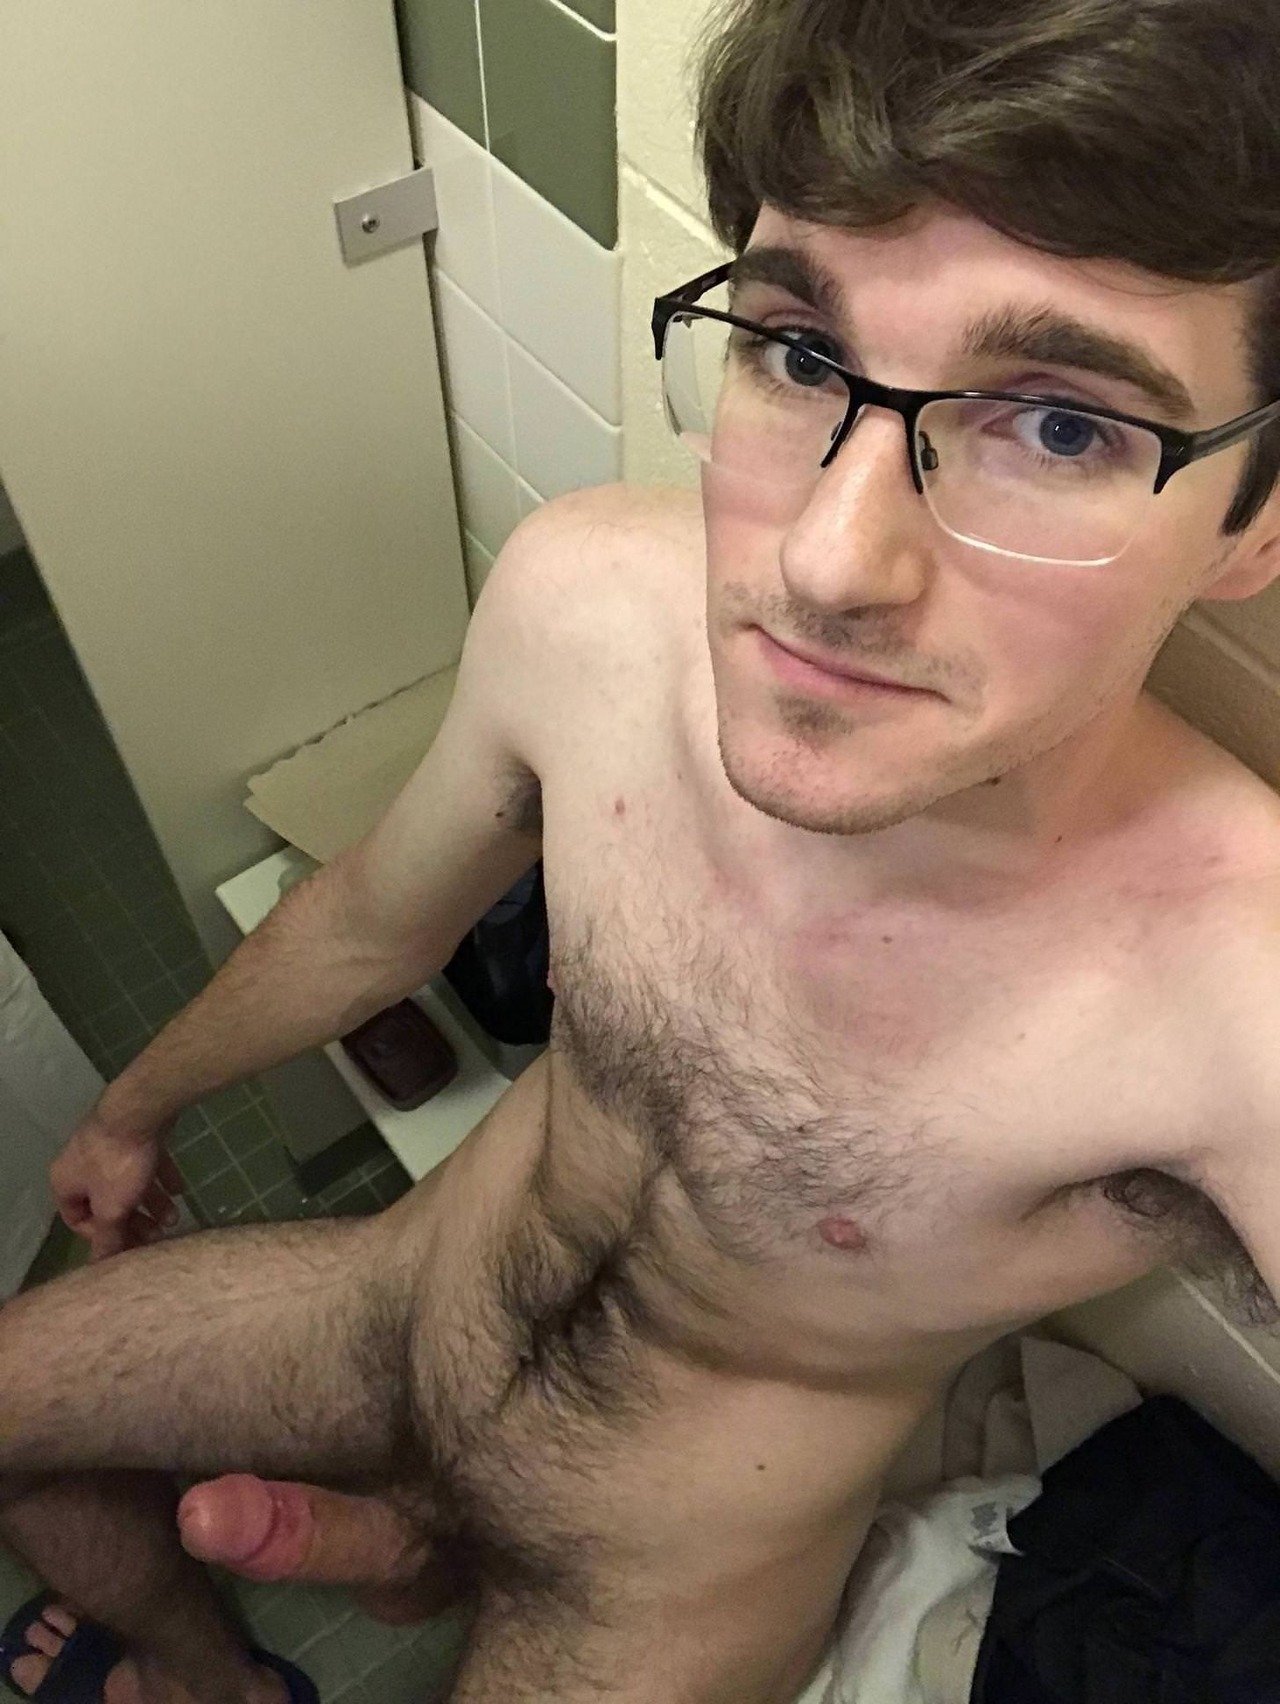 talldorkandhairy: Follow Tall, Dork &amp; Hairy for all types of sexy, furry